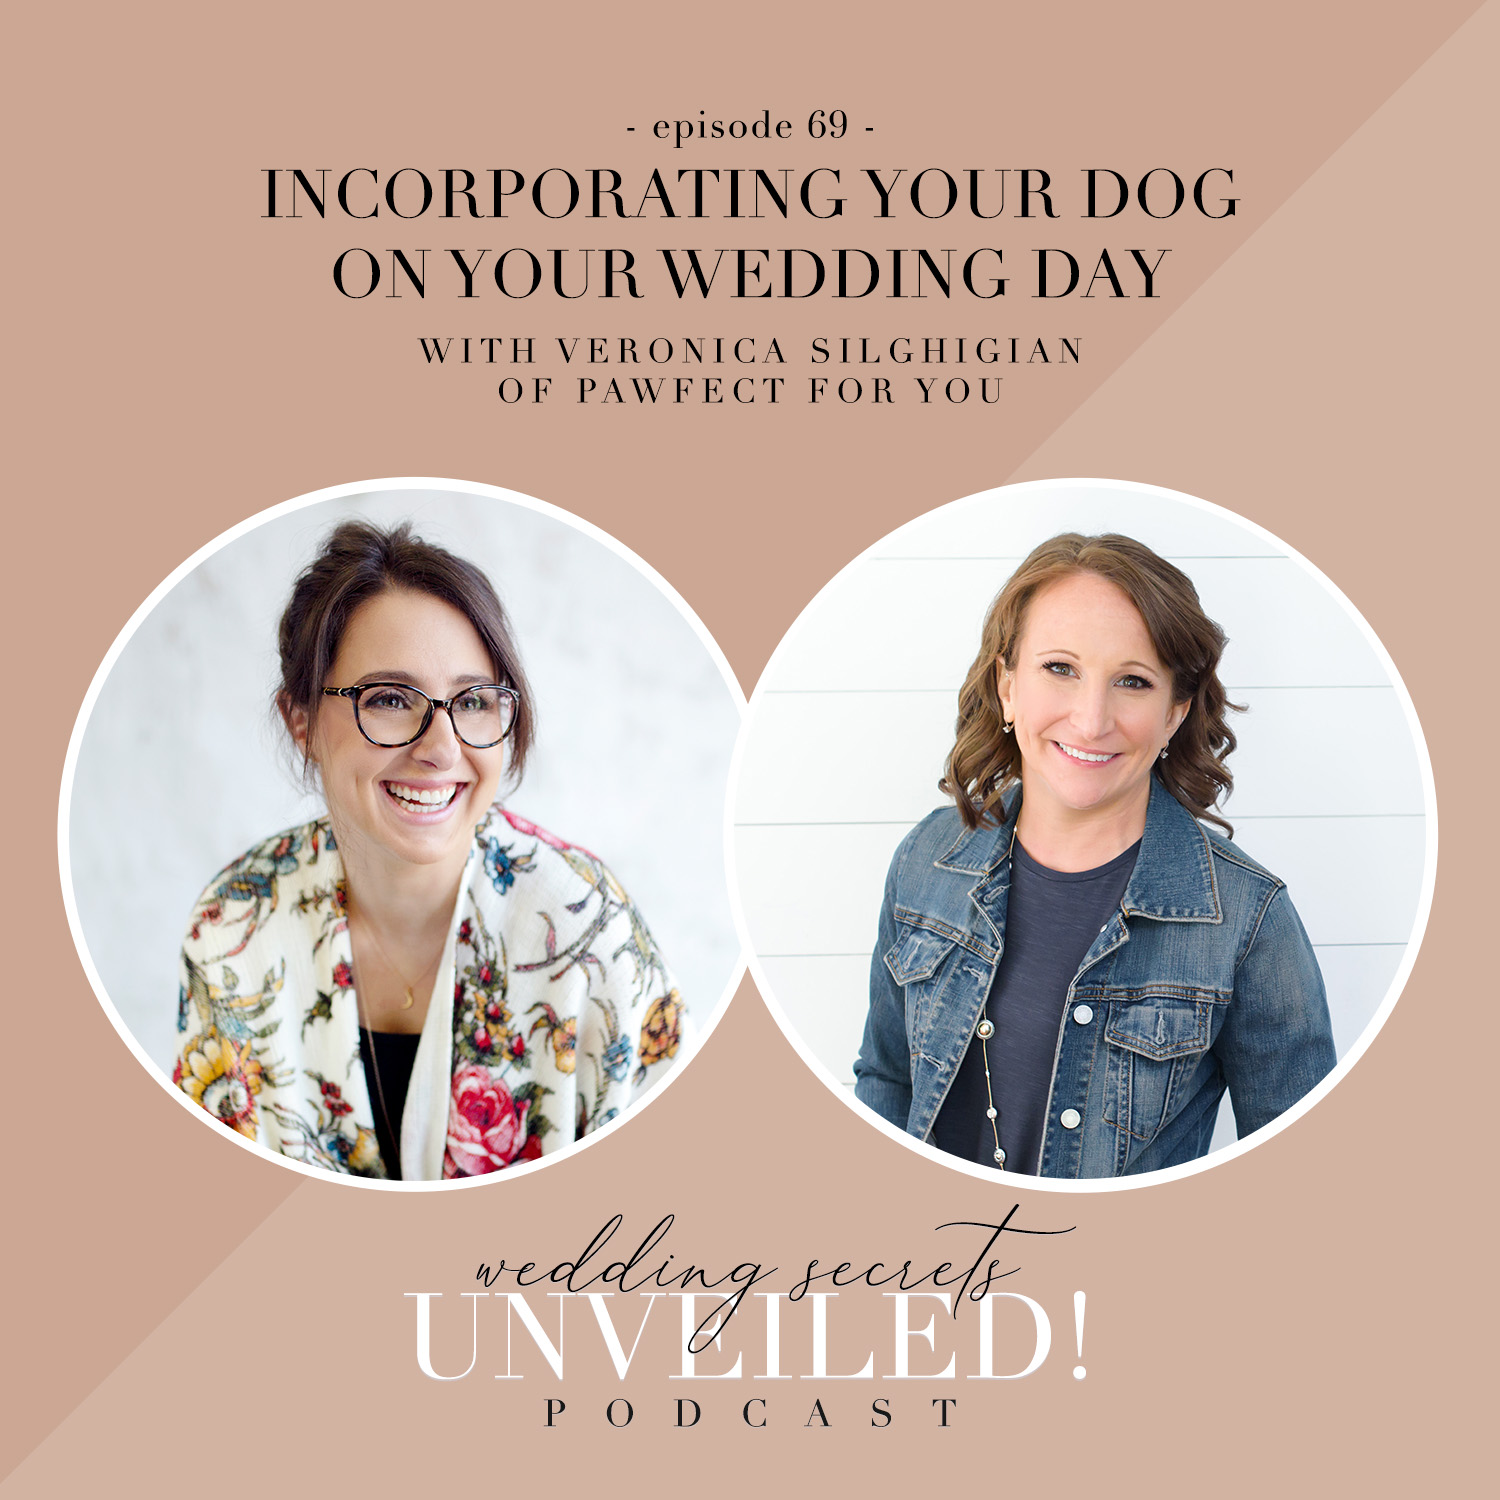 Incorporating Your Dog on Your Wedding Day: tips for your furry friend on your wedding from Veronica Silghigian of Pawfect for You